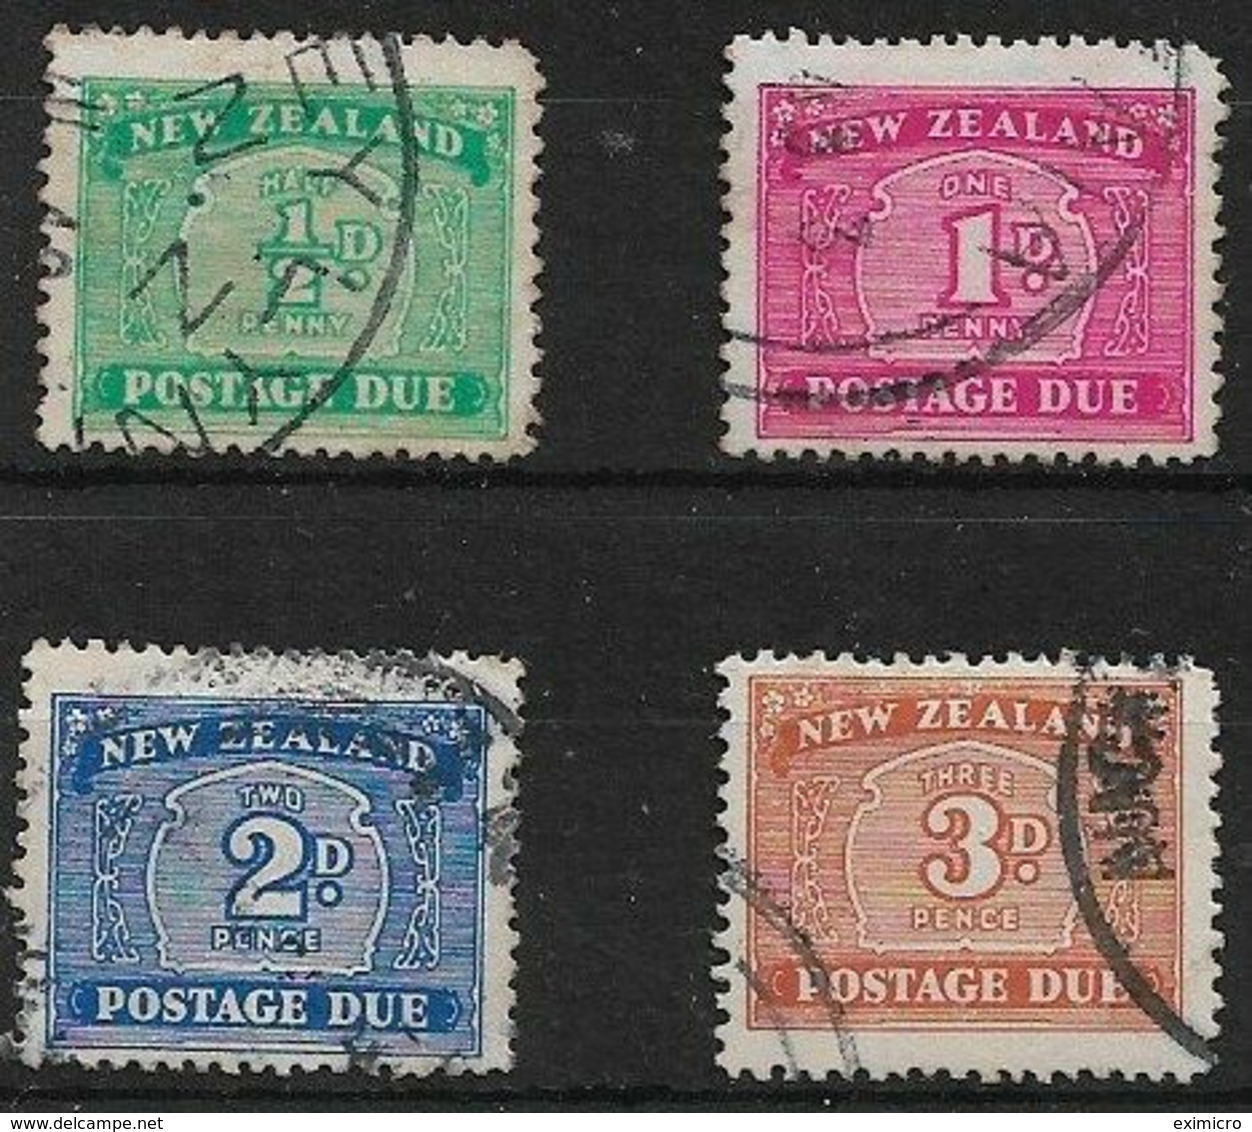 NEW ZEALAND 1939 POSTAGE DUE SET SG D41/44 FINE USED Cat £32 - Postage Due